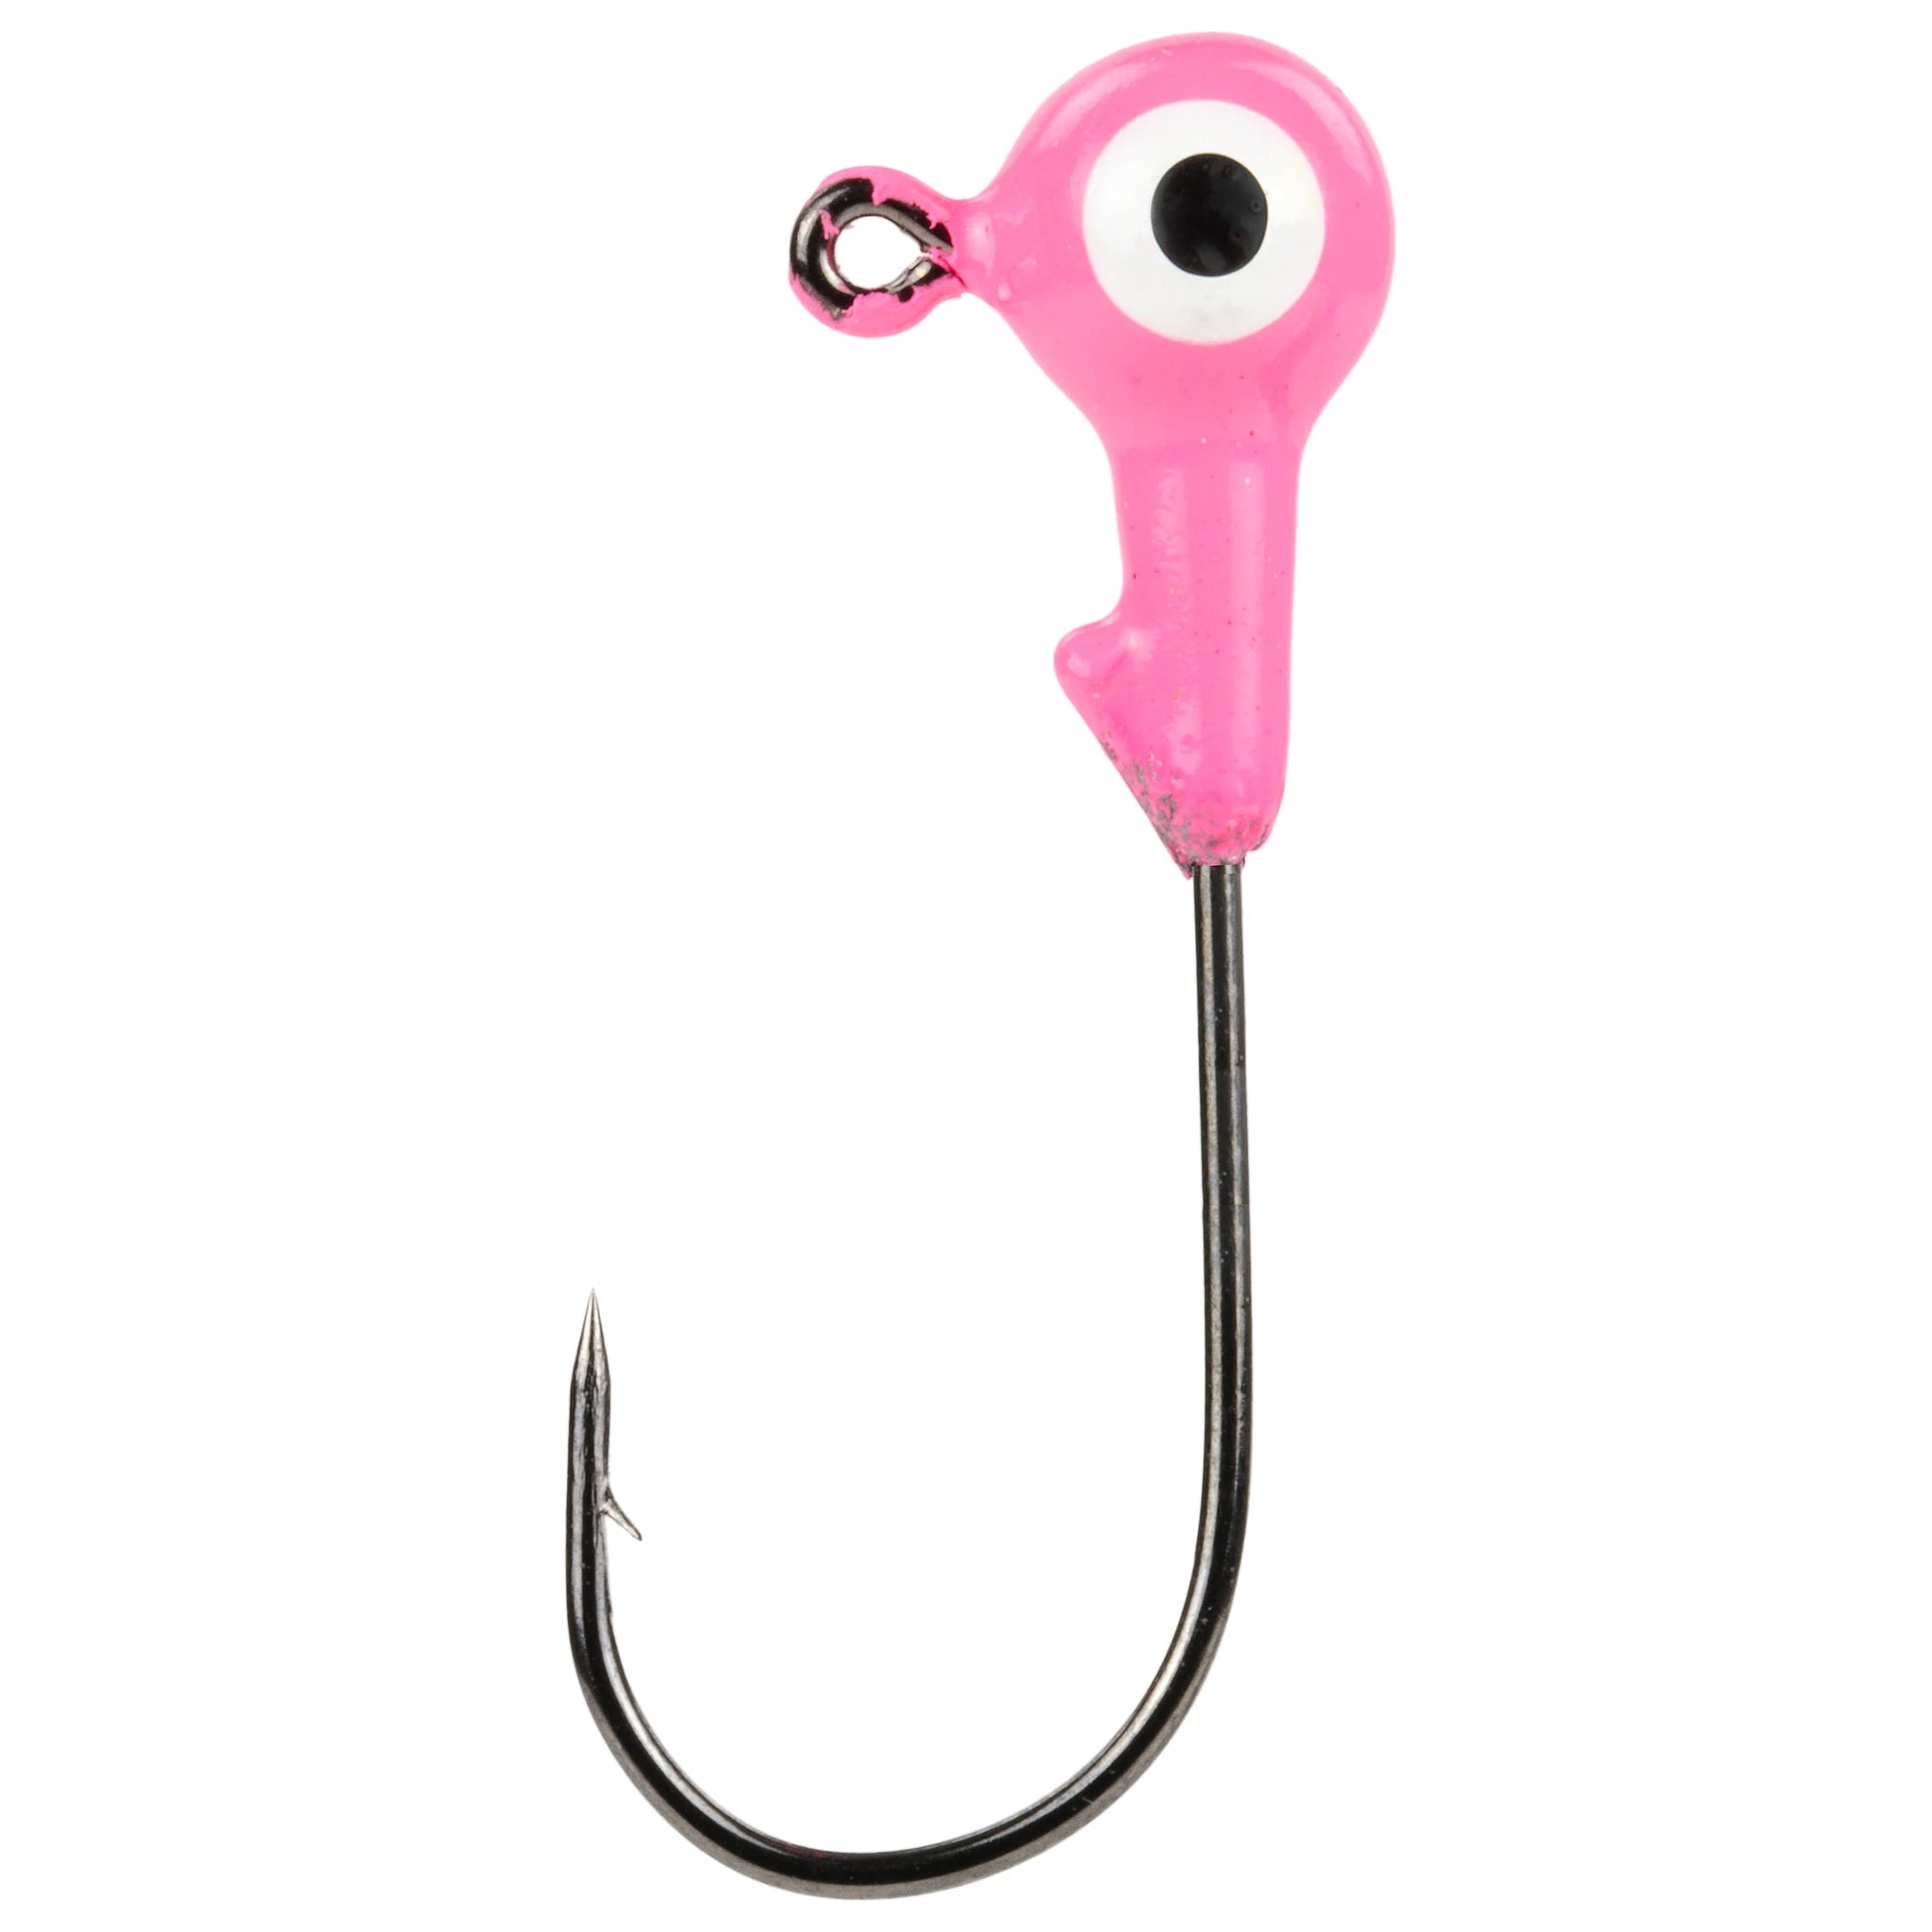 Mr. Crappie Fishing Terminal Tackle for sale